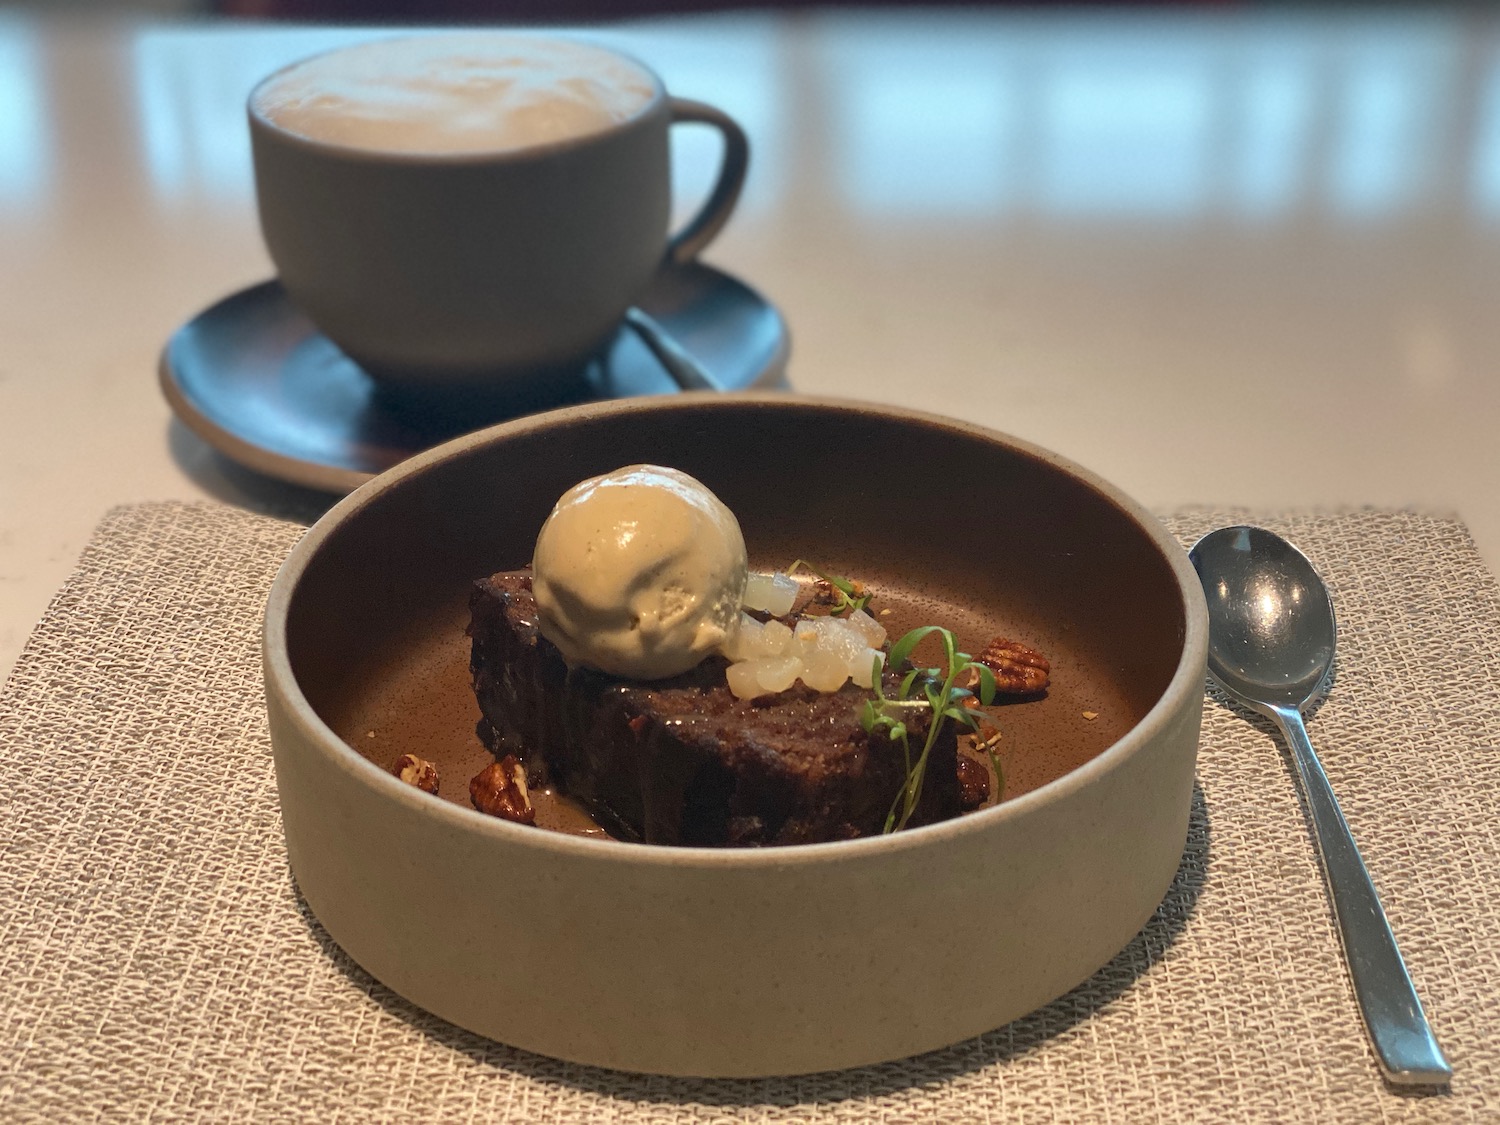 a brownie with ice cream in a bowl next to a cup of coffee